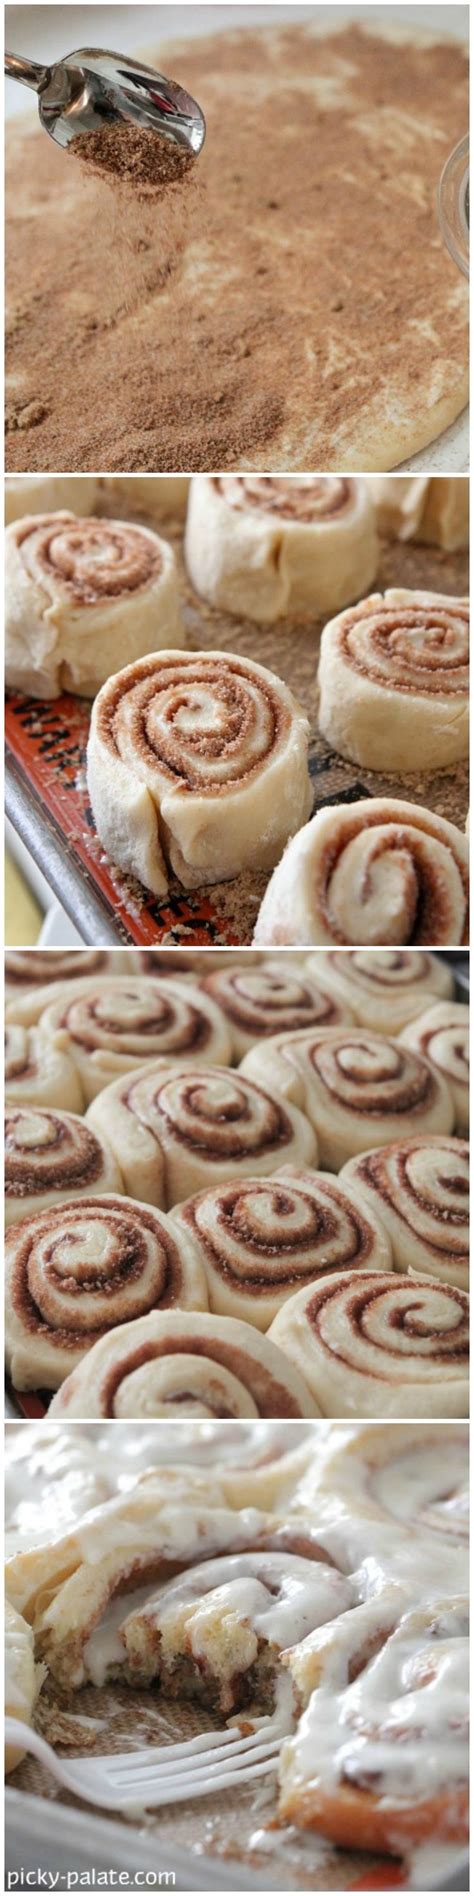 How To Make The Perfect Cinnamon Rolls By Picky Palate Recipes Foods